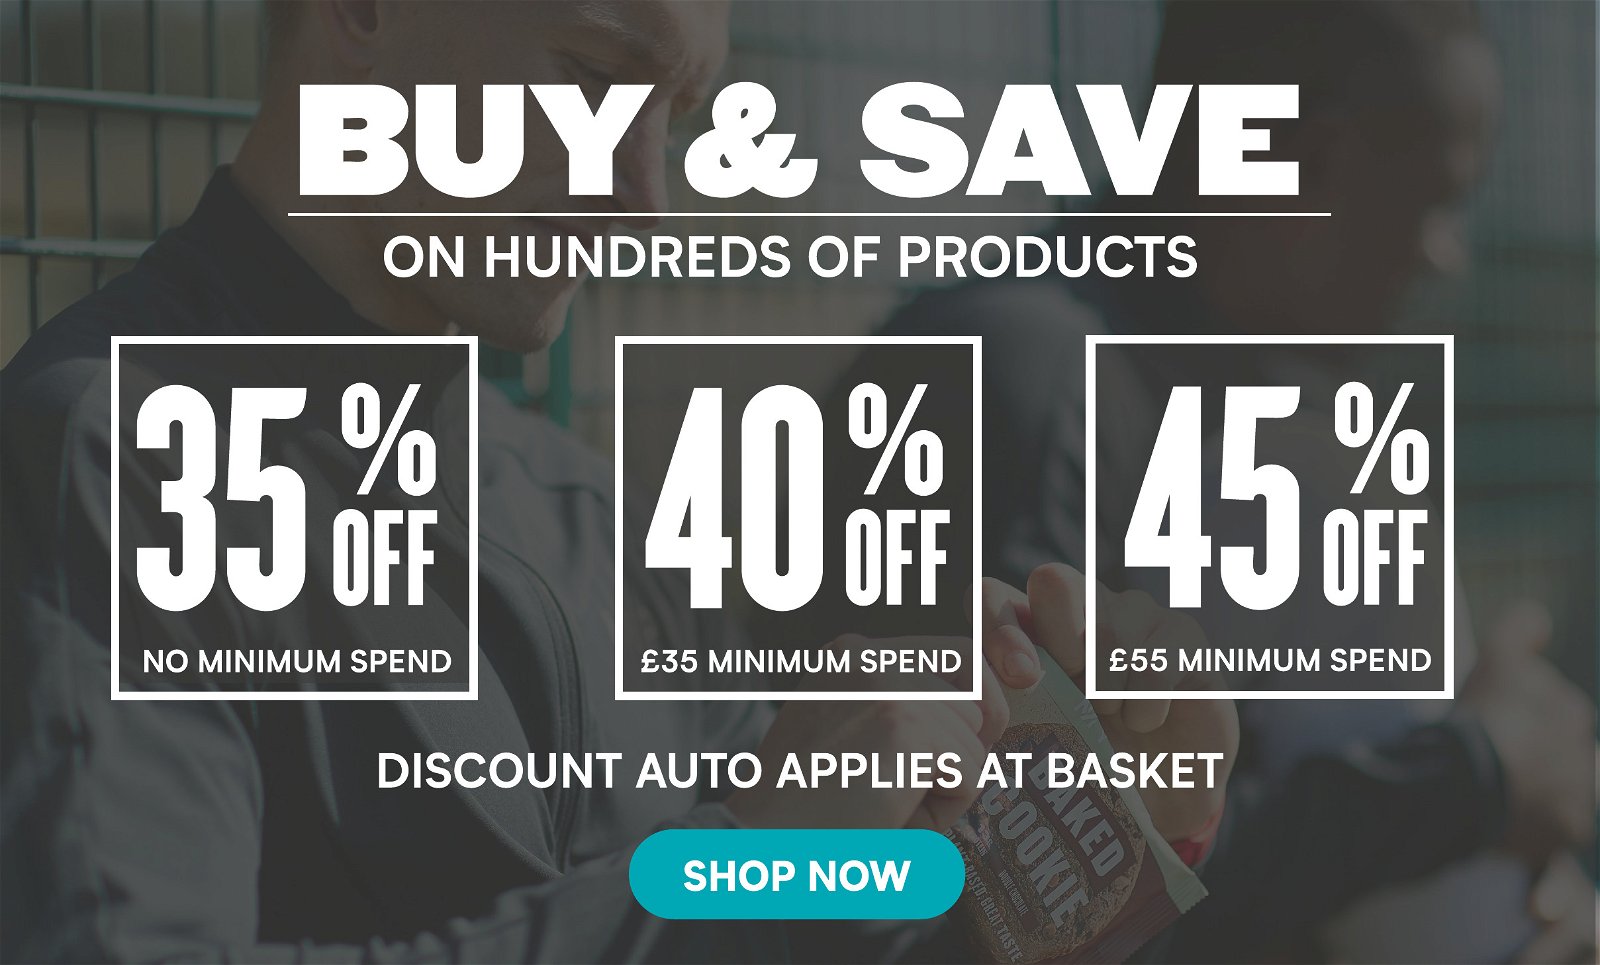 Buy & Save on selected items